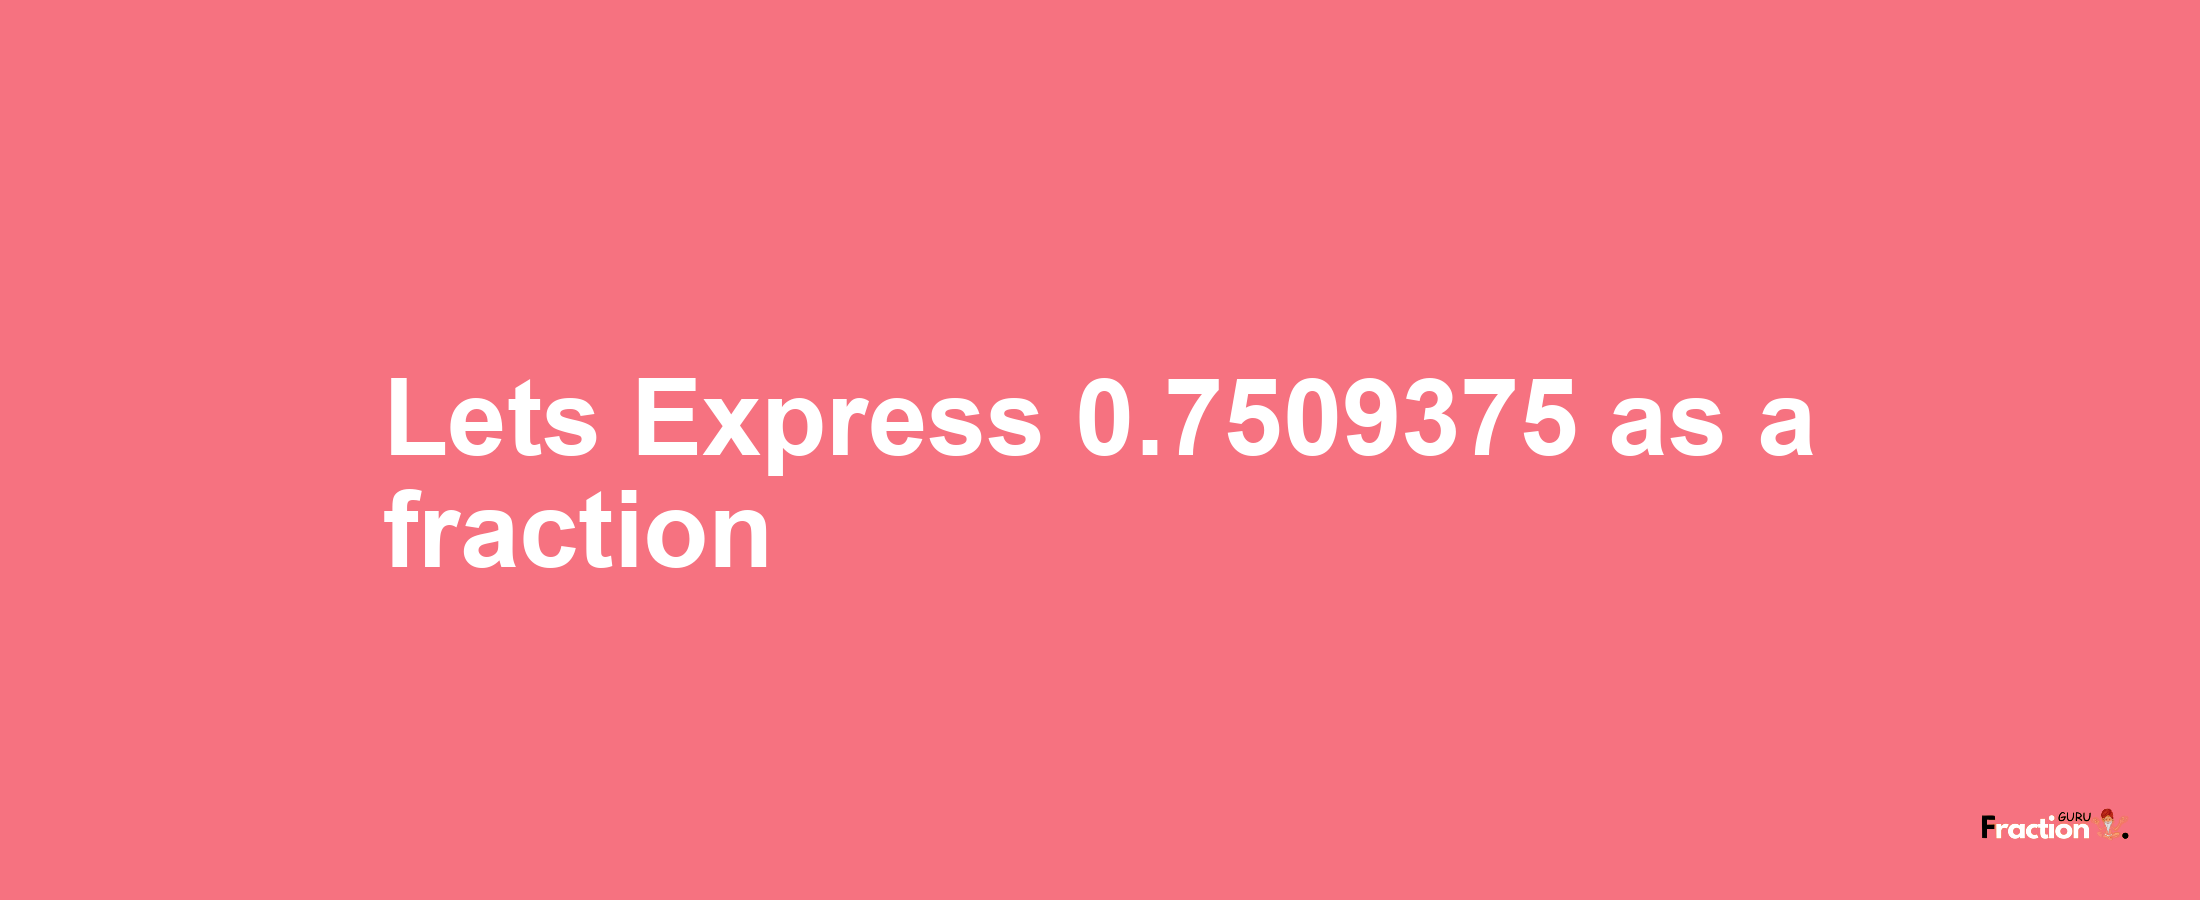 Lets Express 0.7509375 as afraction